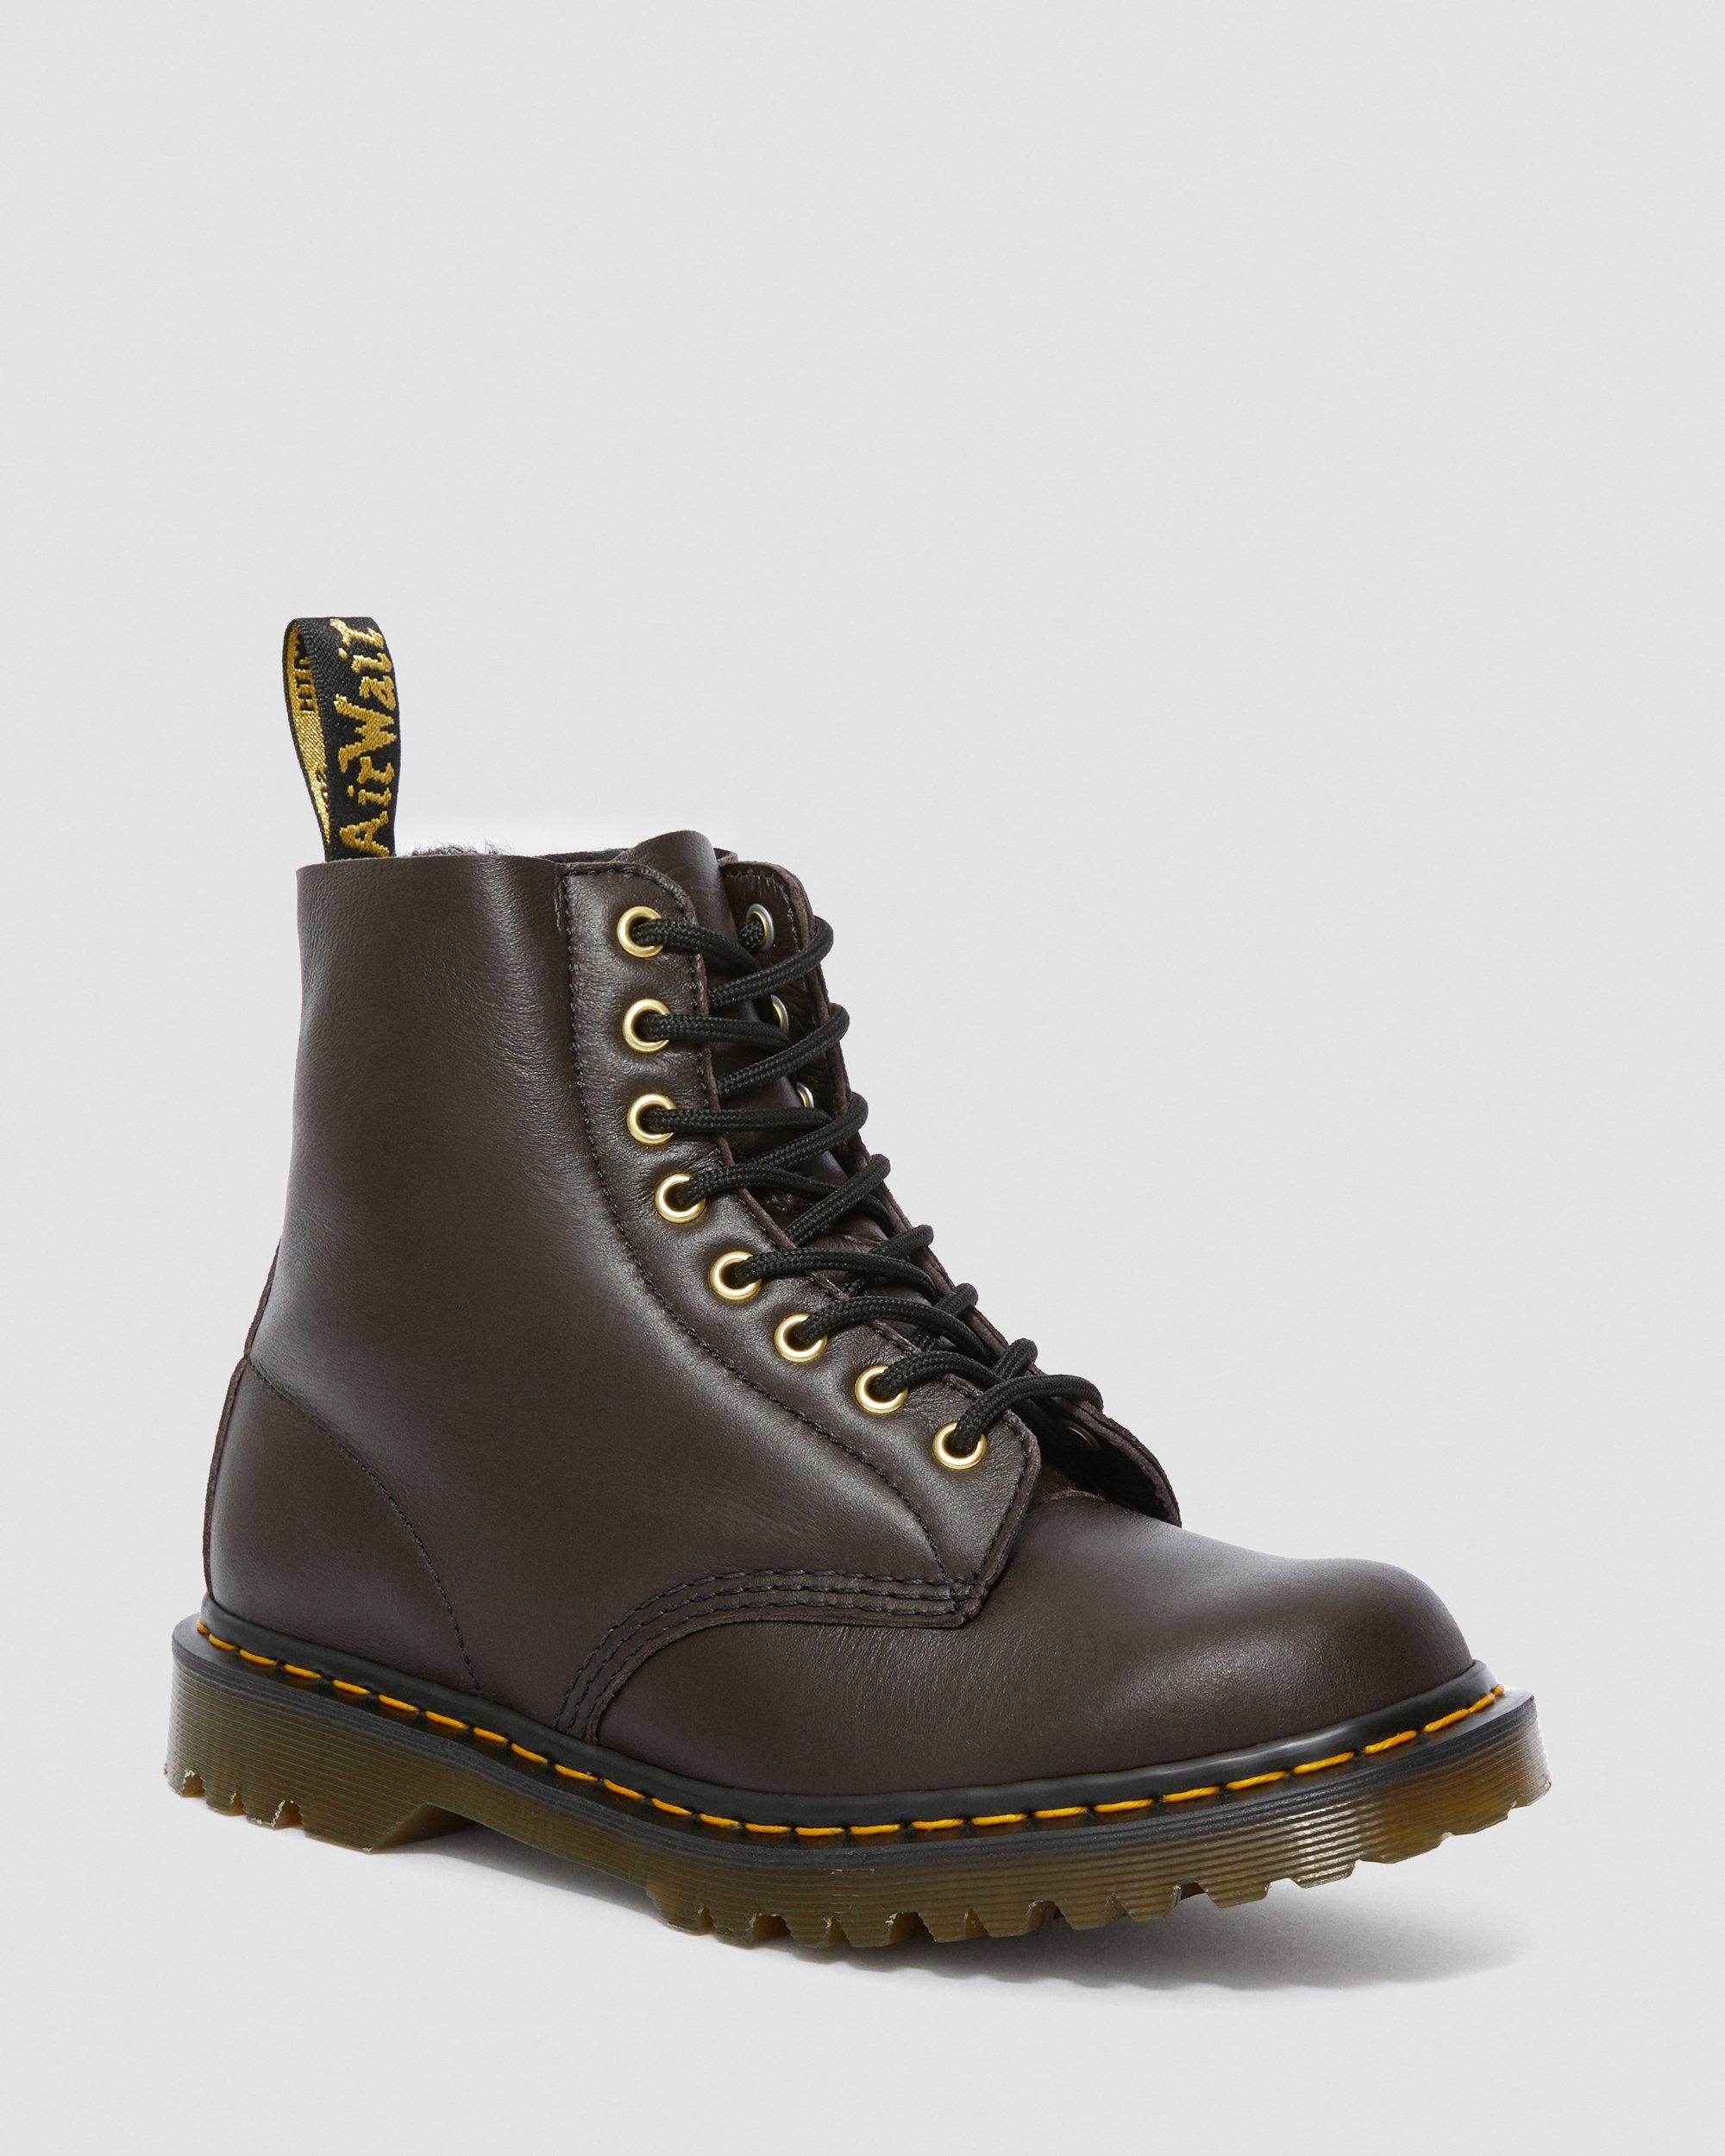 Fur-Lined 1460 Pascal Shearling | Dr. Martens